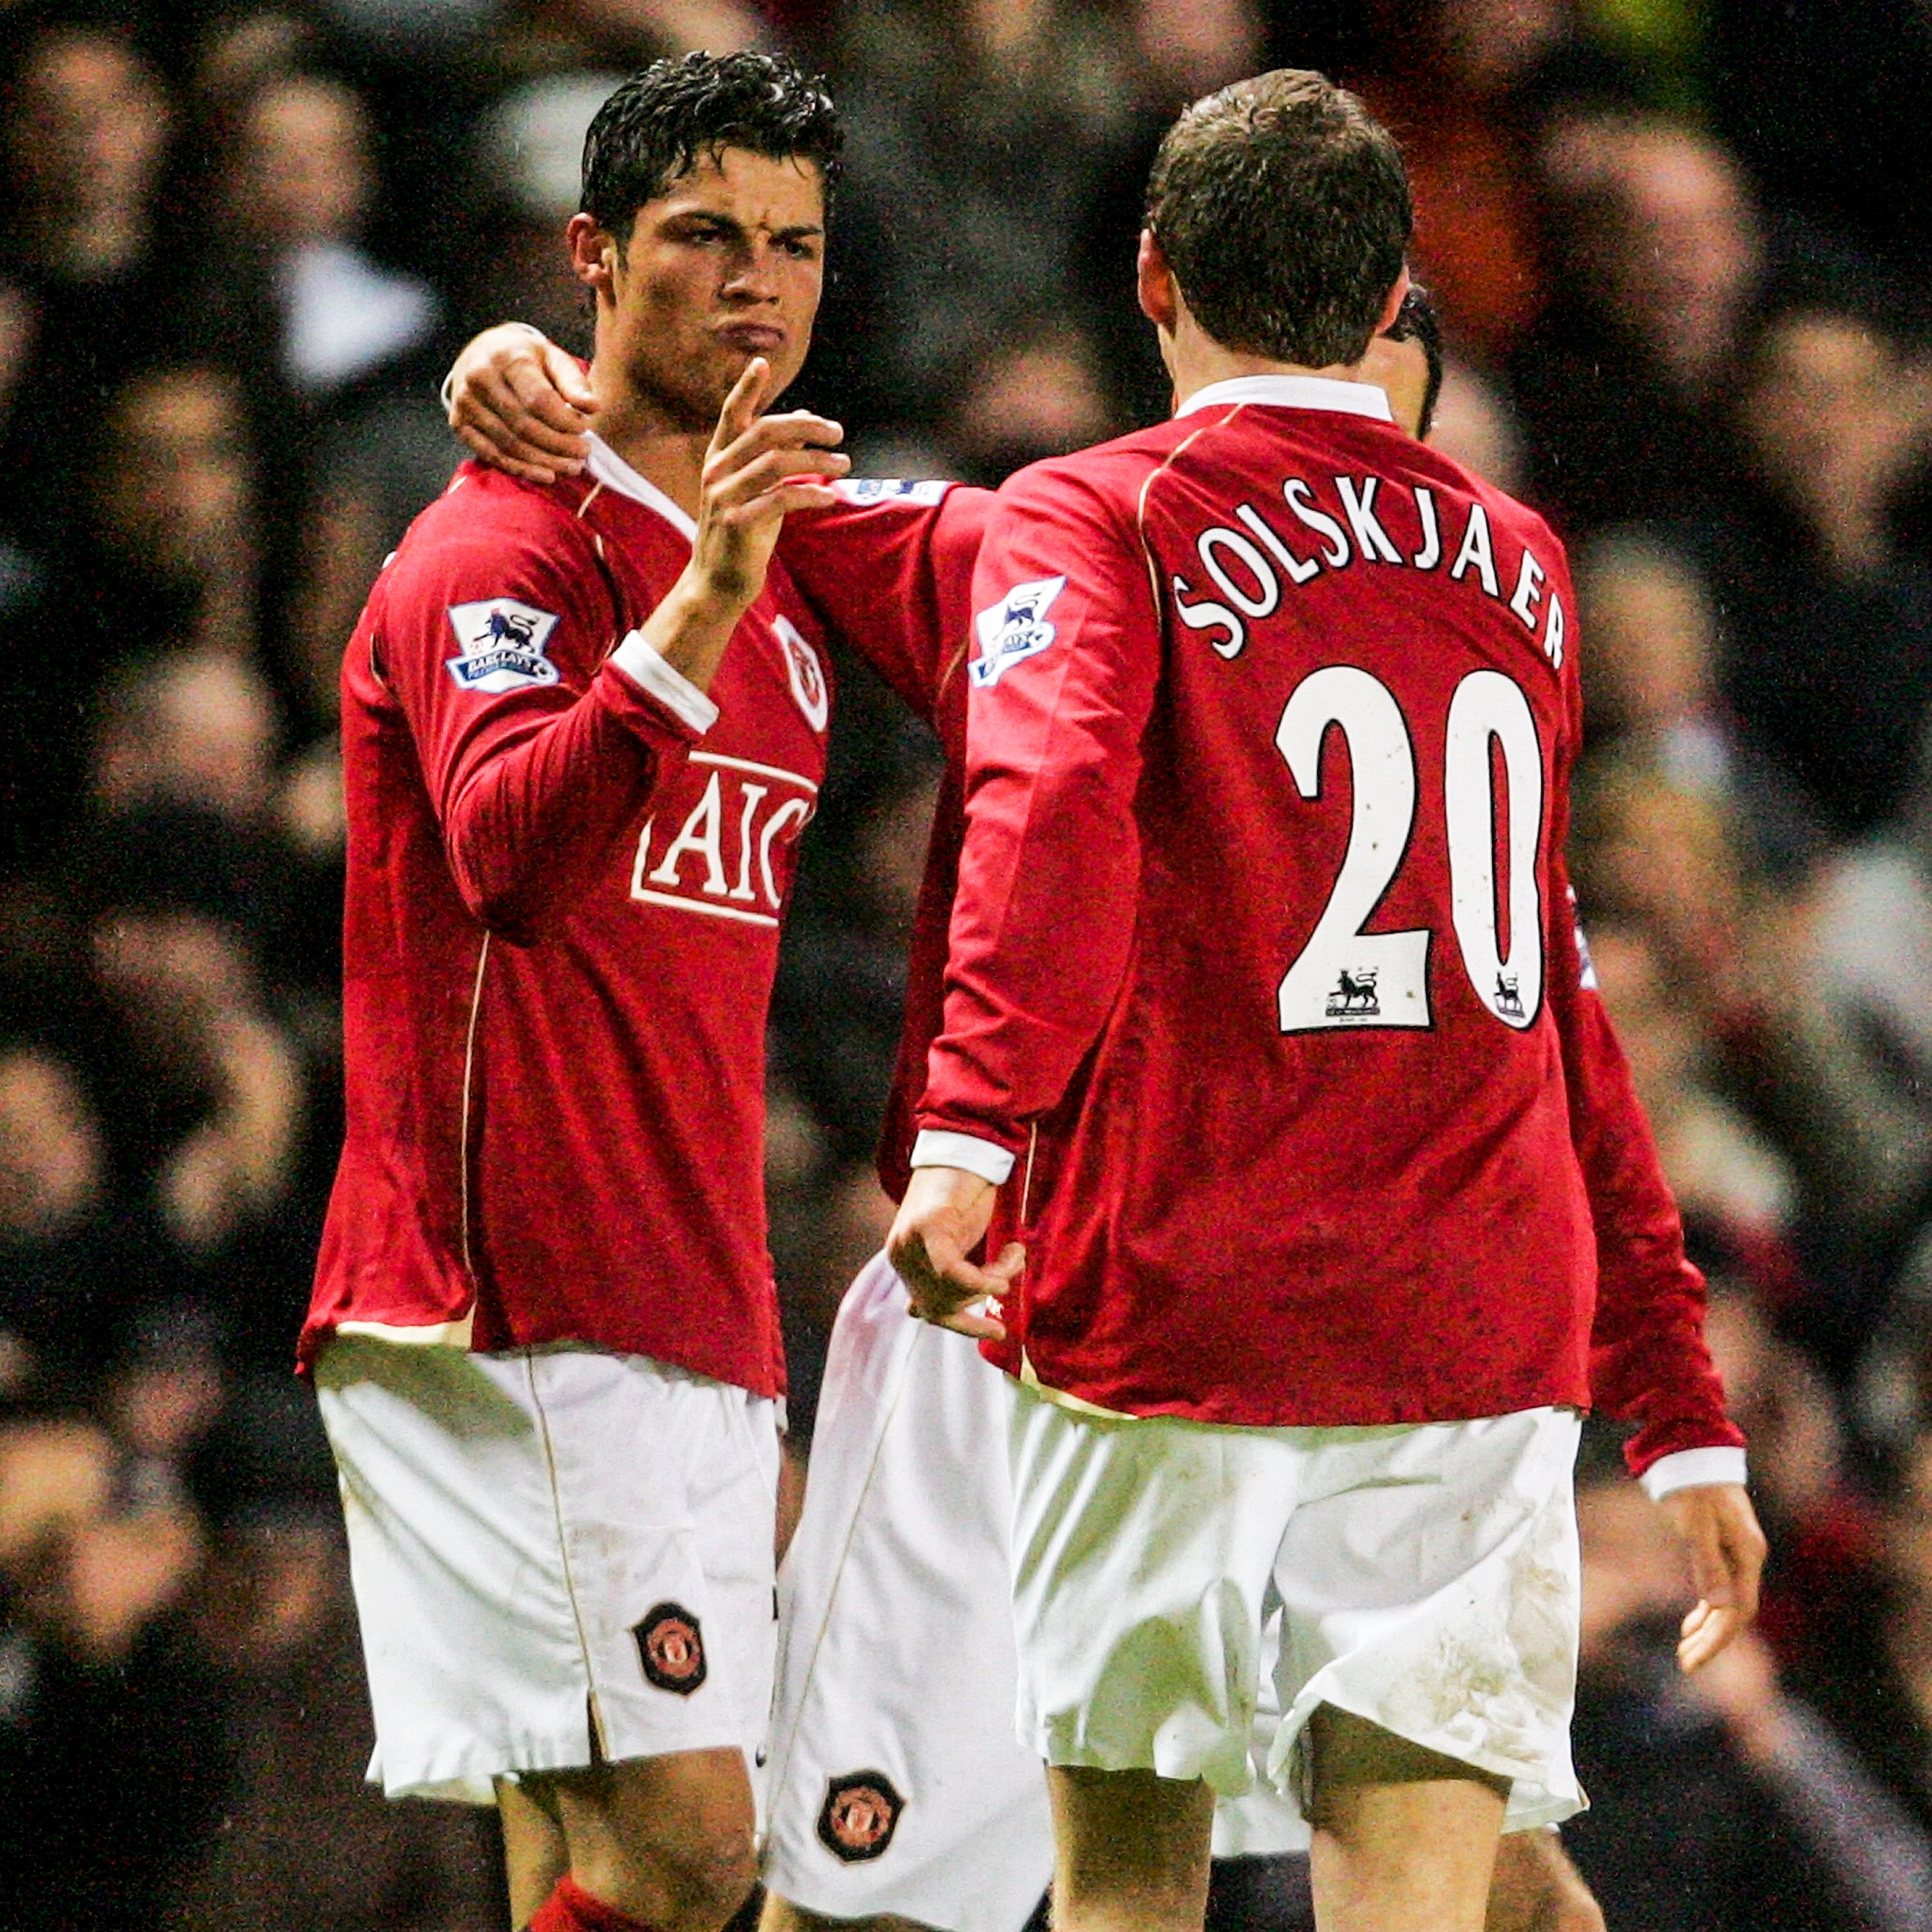 B/R Football on X: "In 2006, Cristiano Ronaldo assisted Ole Gunnar Solskjaer  for his goal vs. Reading. Now they're back together   https://t.co/5FqGORhVNv" / X